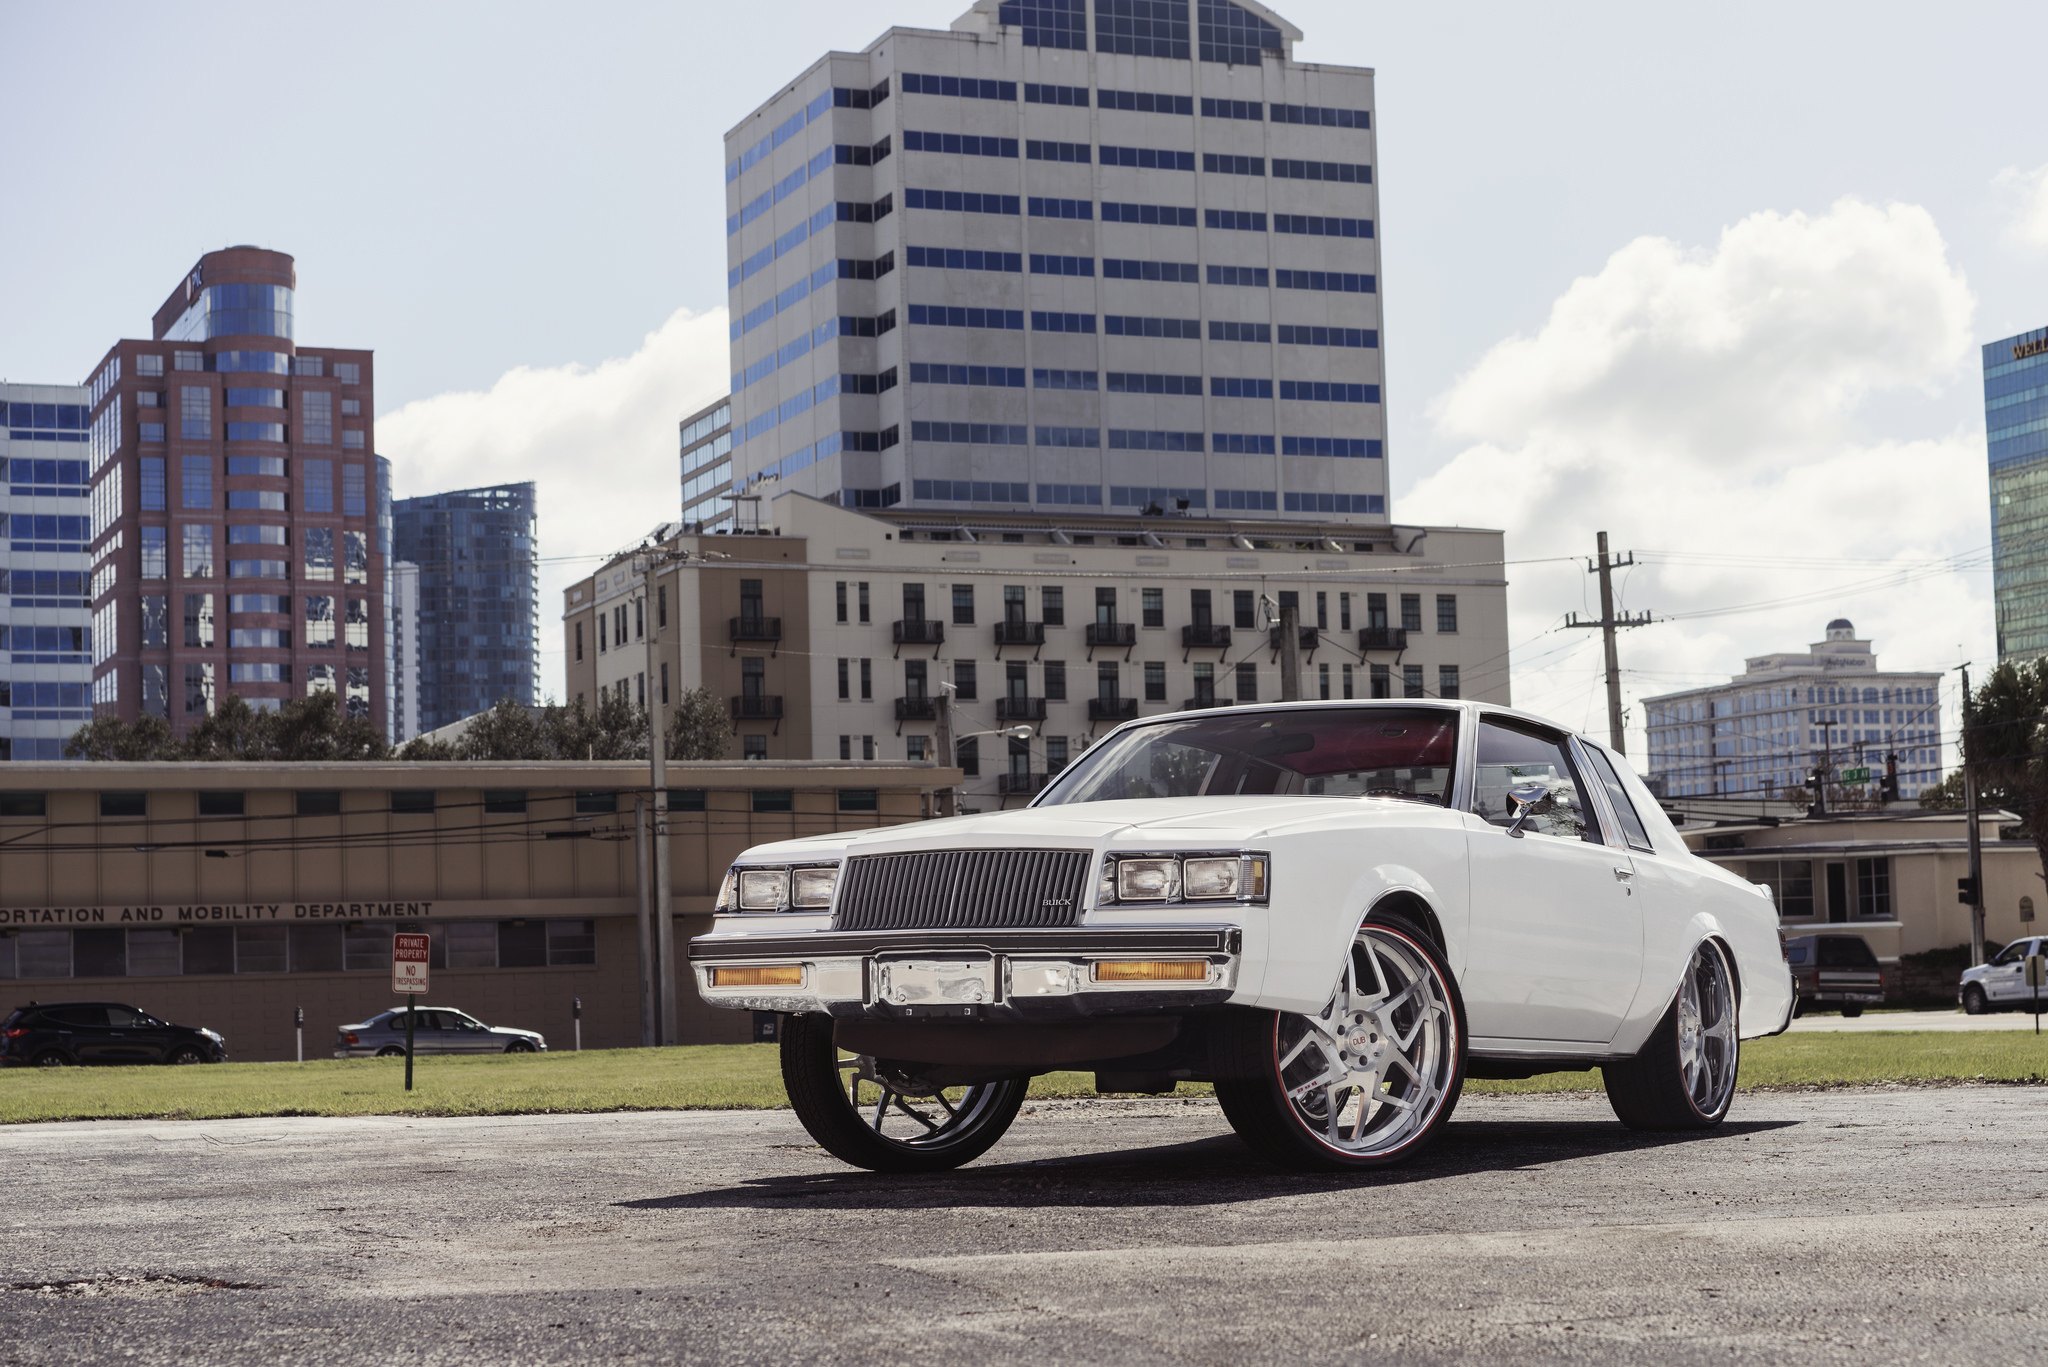 Lifted Buick Regal on Brushed DUB Wheels - Photo by DUB